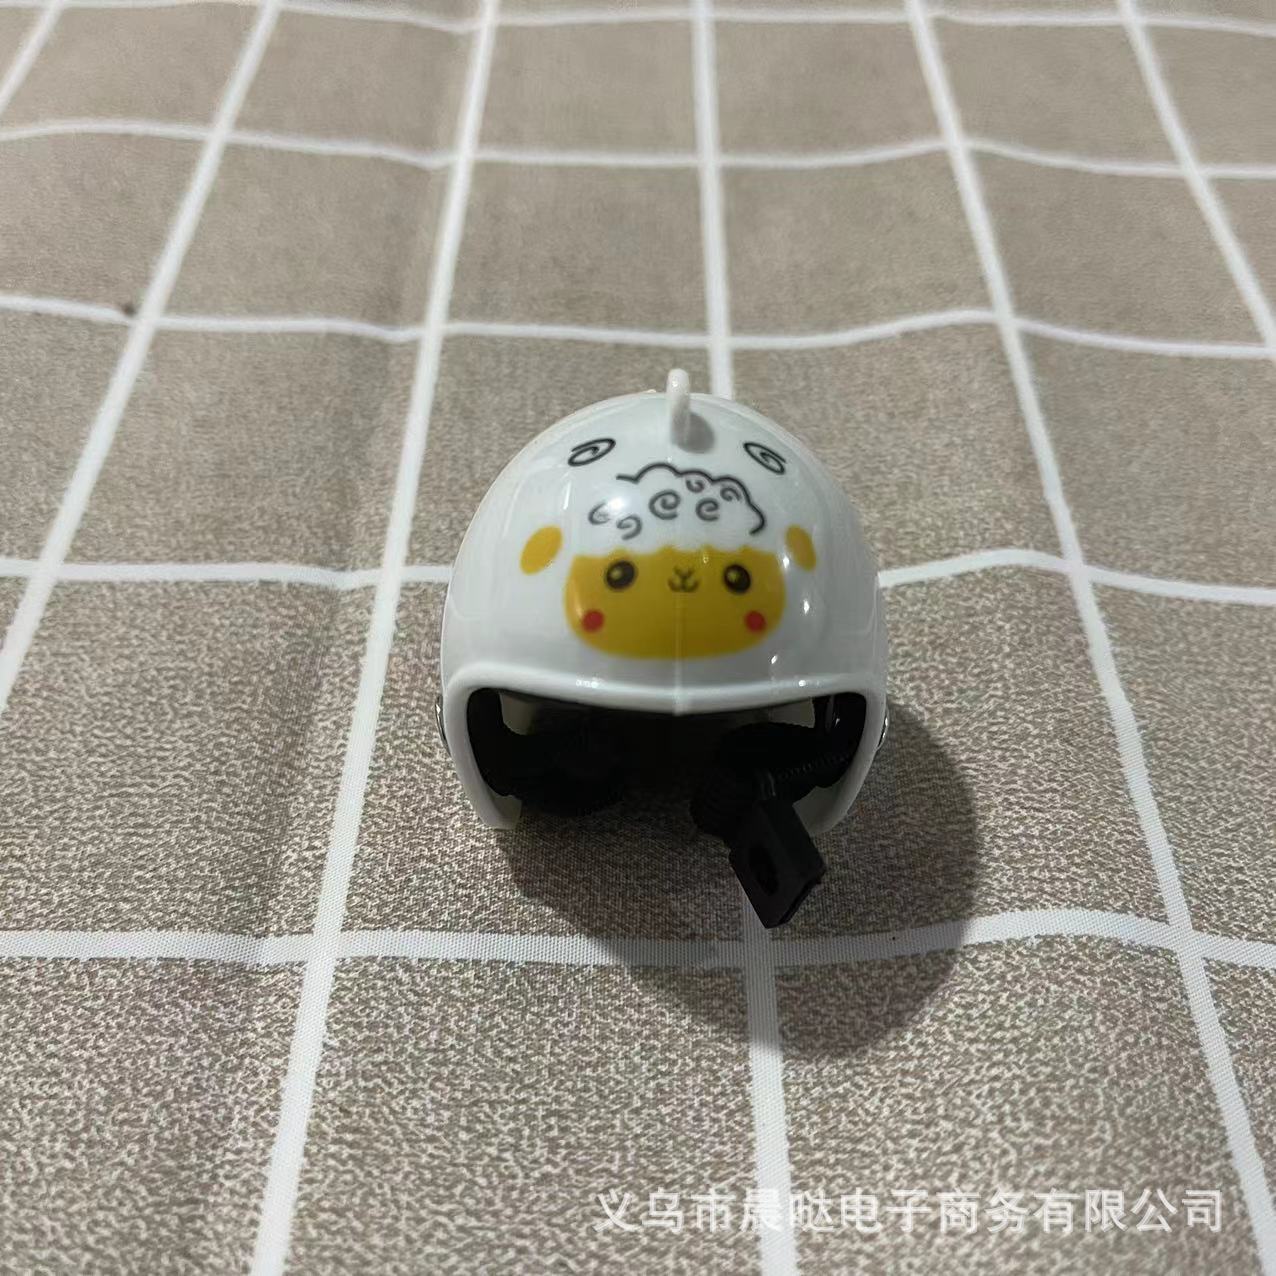 Car Breaking Wind Duck Bicycle Small Yellow Duck TikTok Small Yellow Duck Electric Motorcycle Bamboo Dragonfly Helmet Turbo Duck